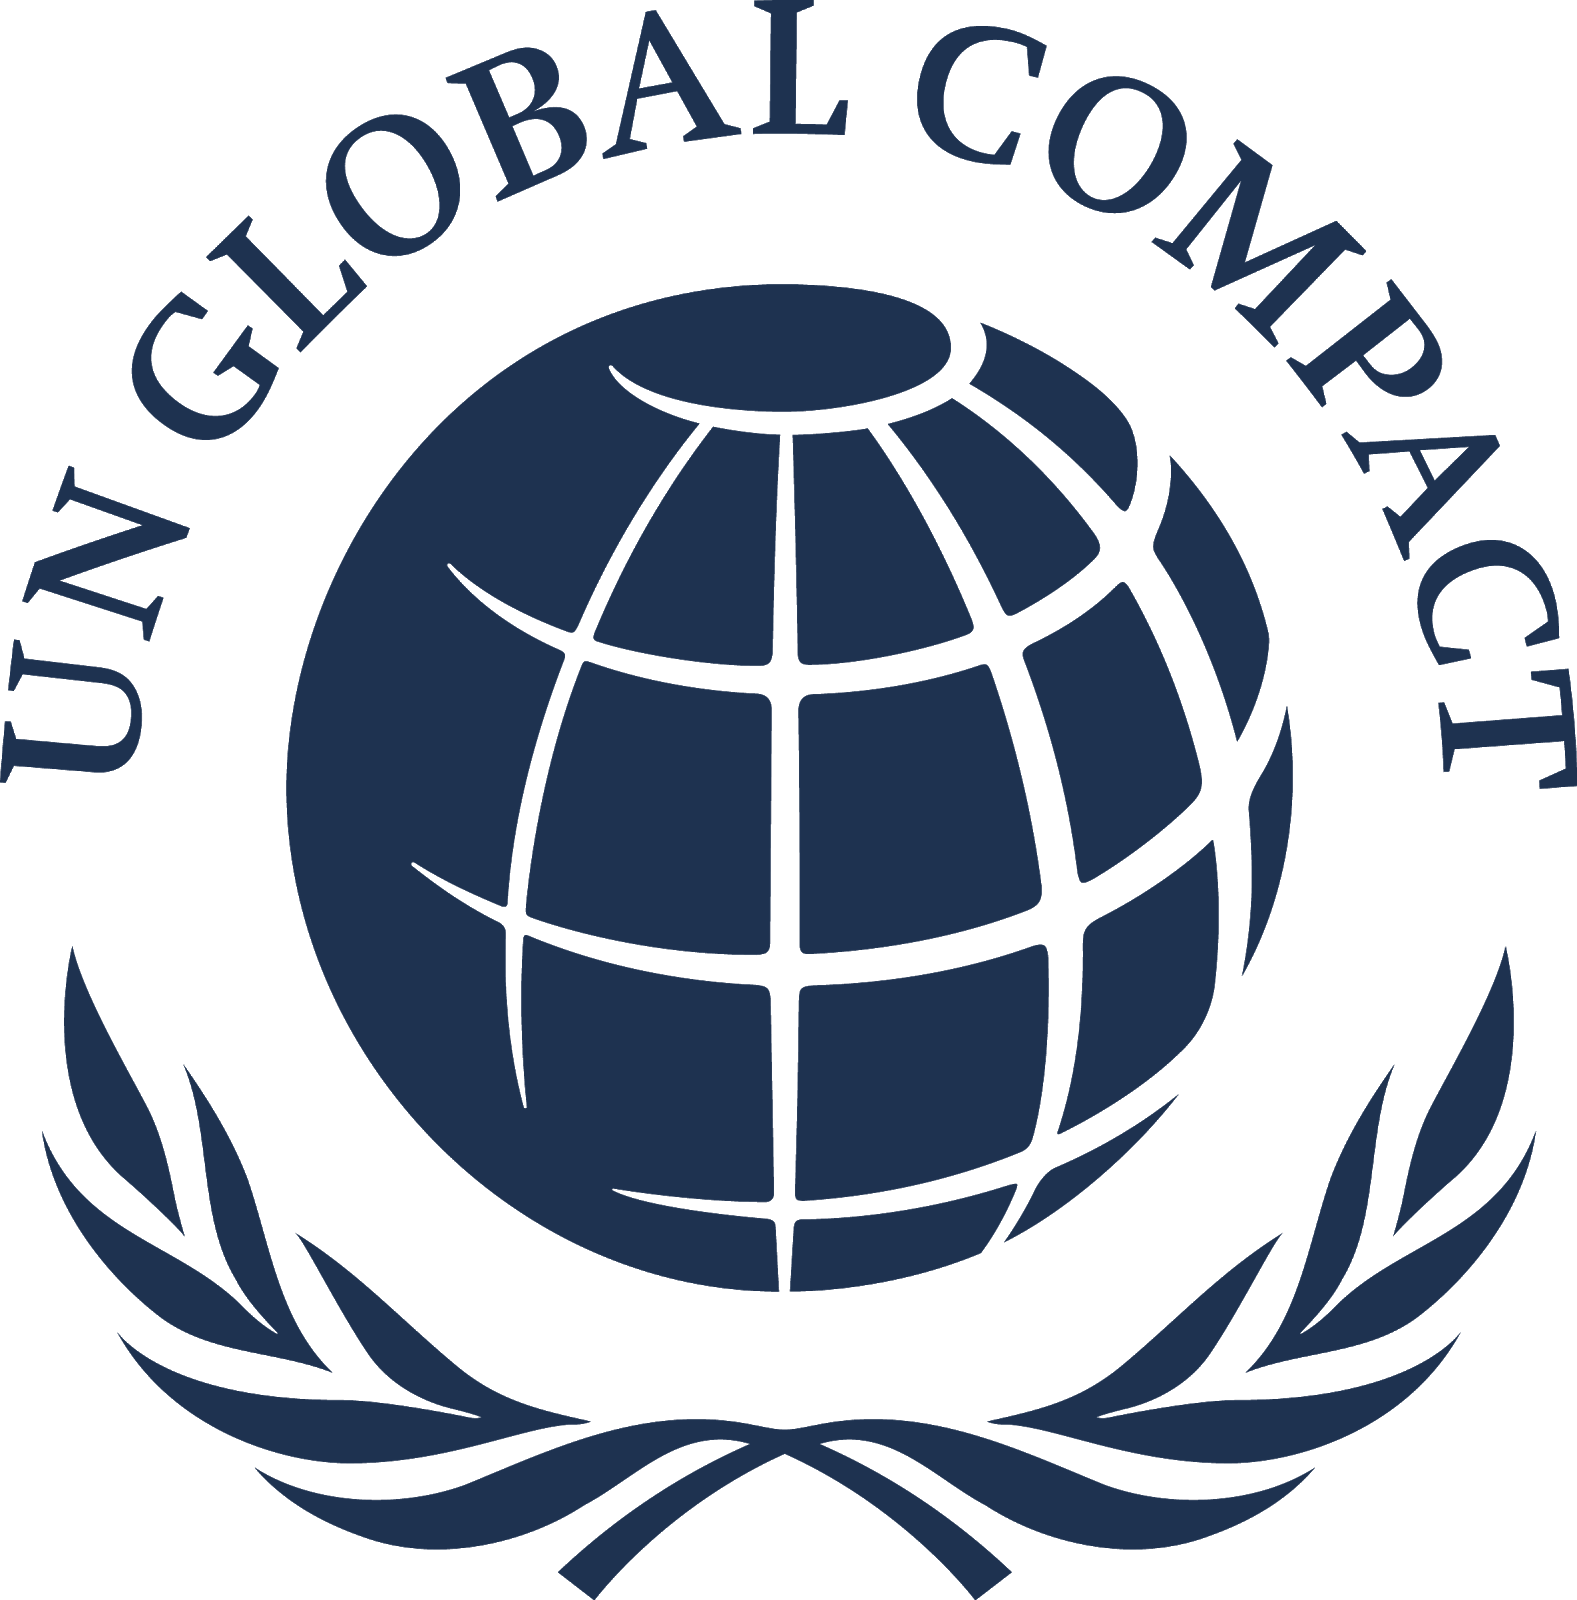 UN Global Compact re